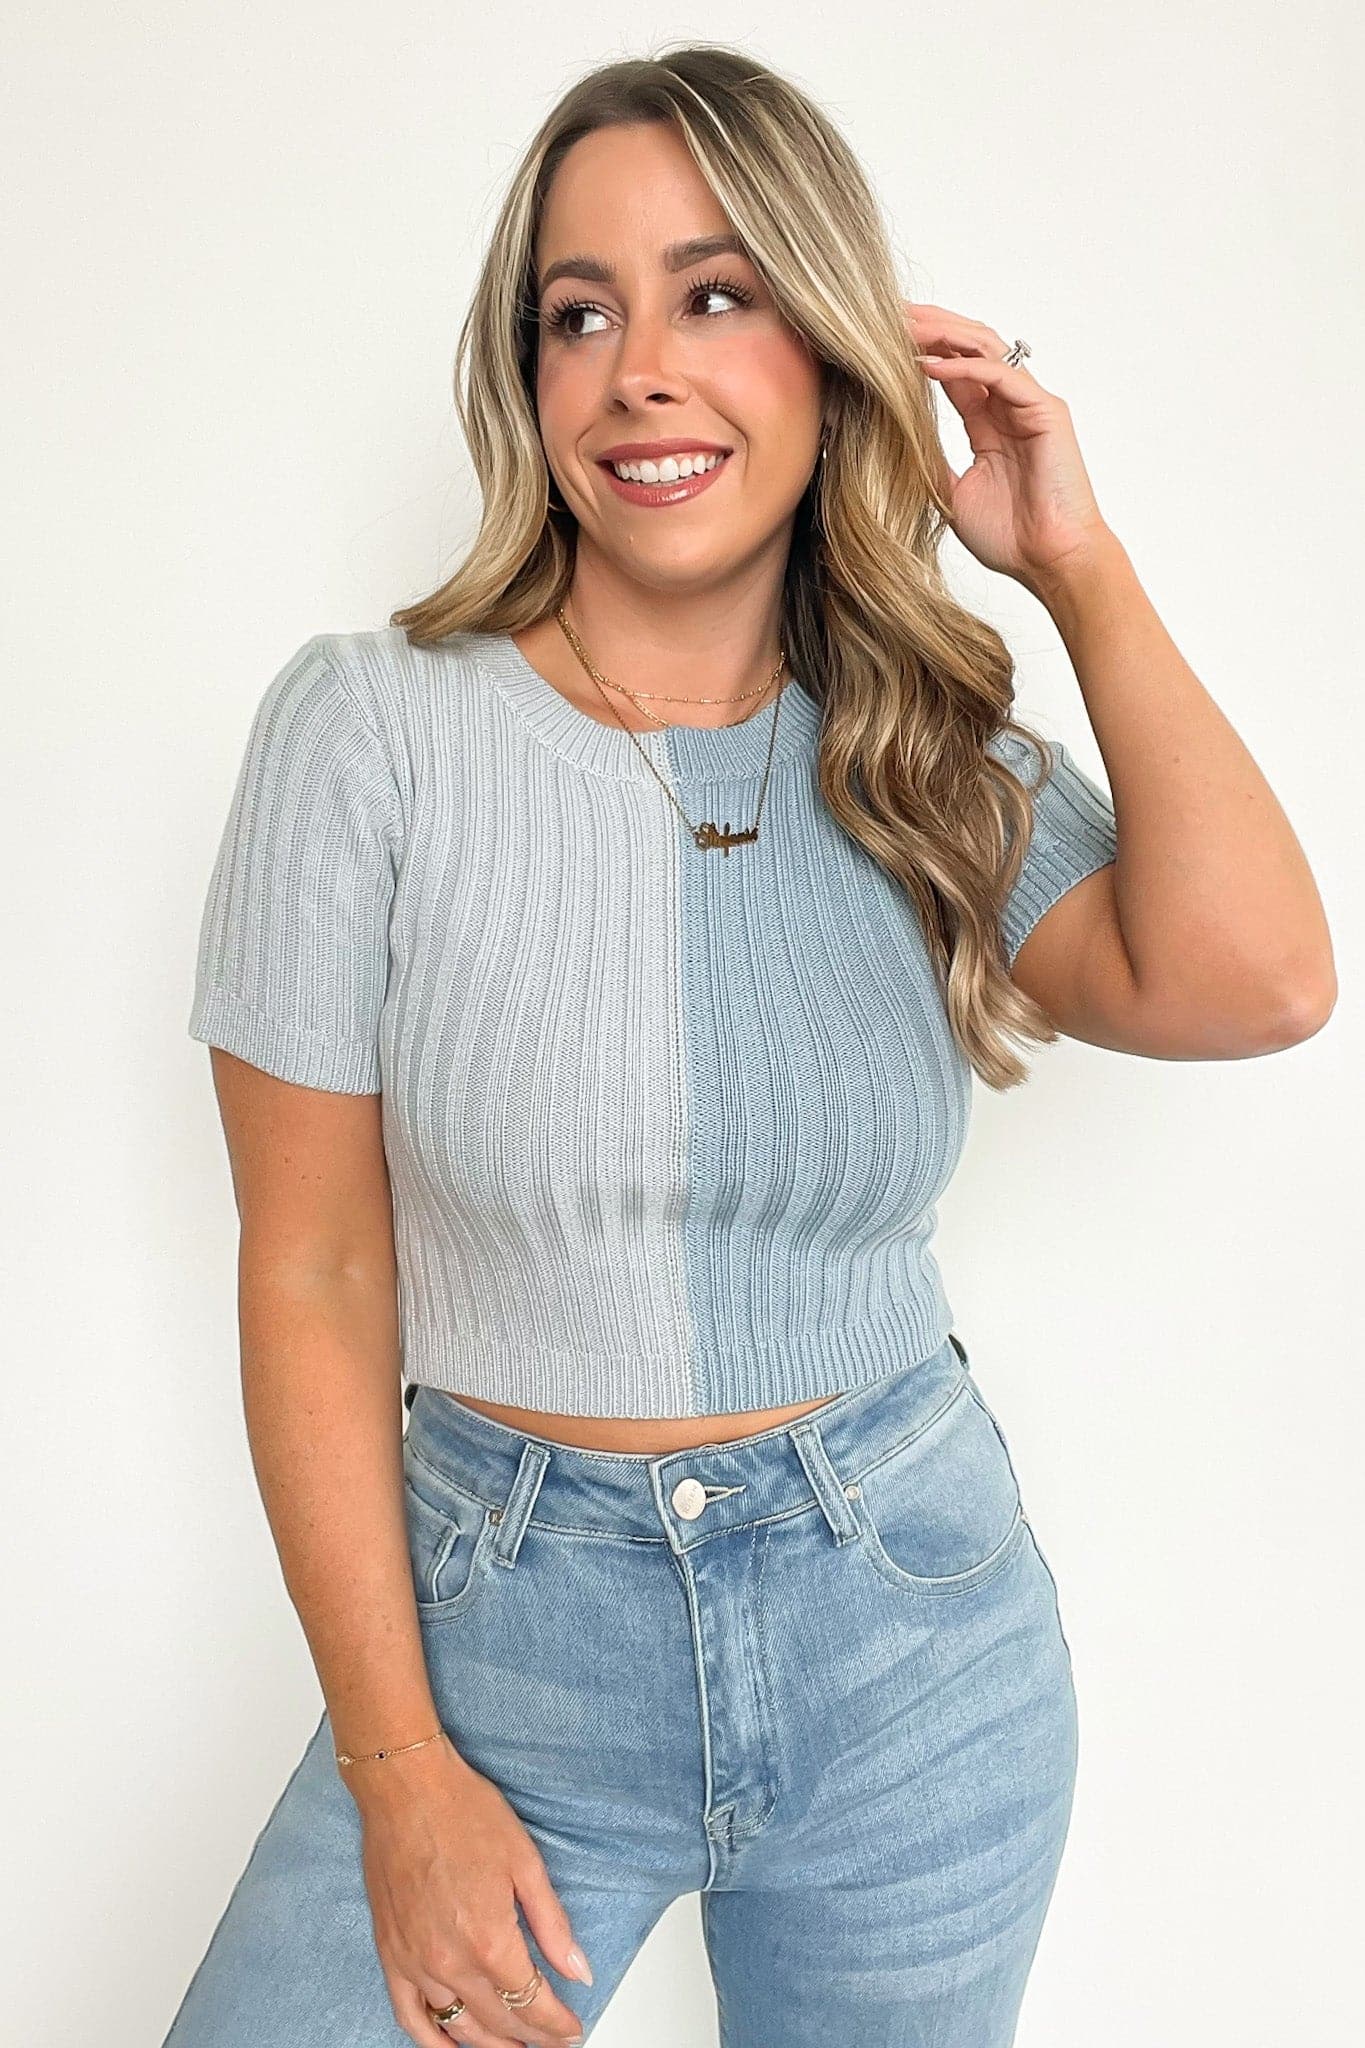  Raquela Short Sleeve Color Block Knit Top - FINAL SALE - Madison and Mallory